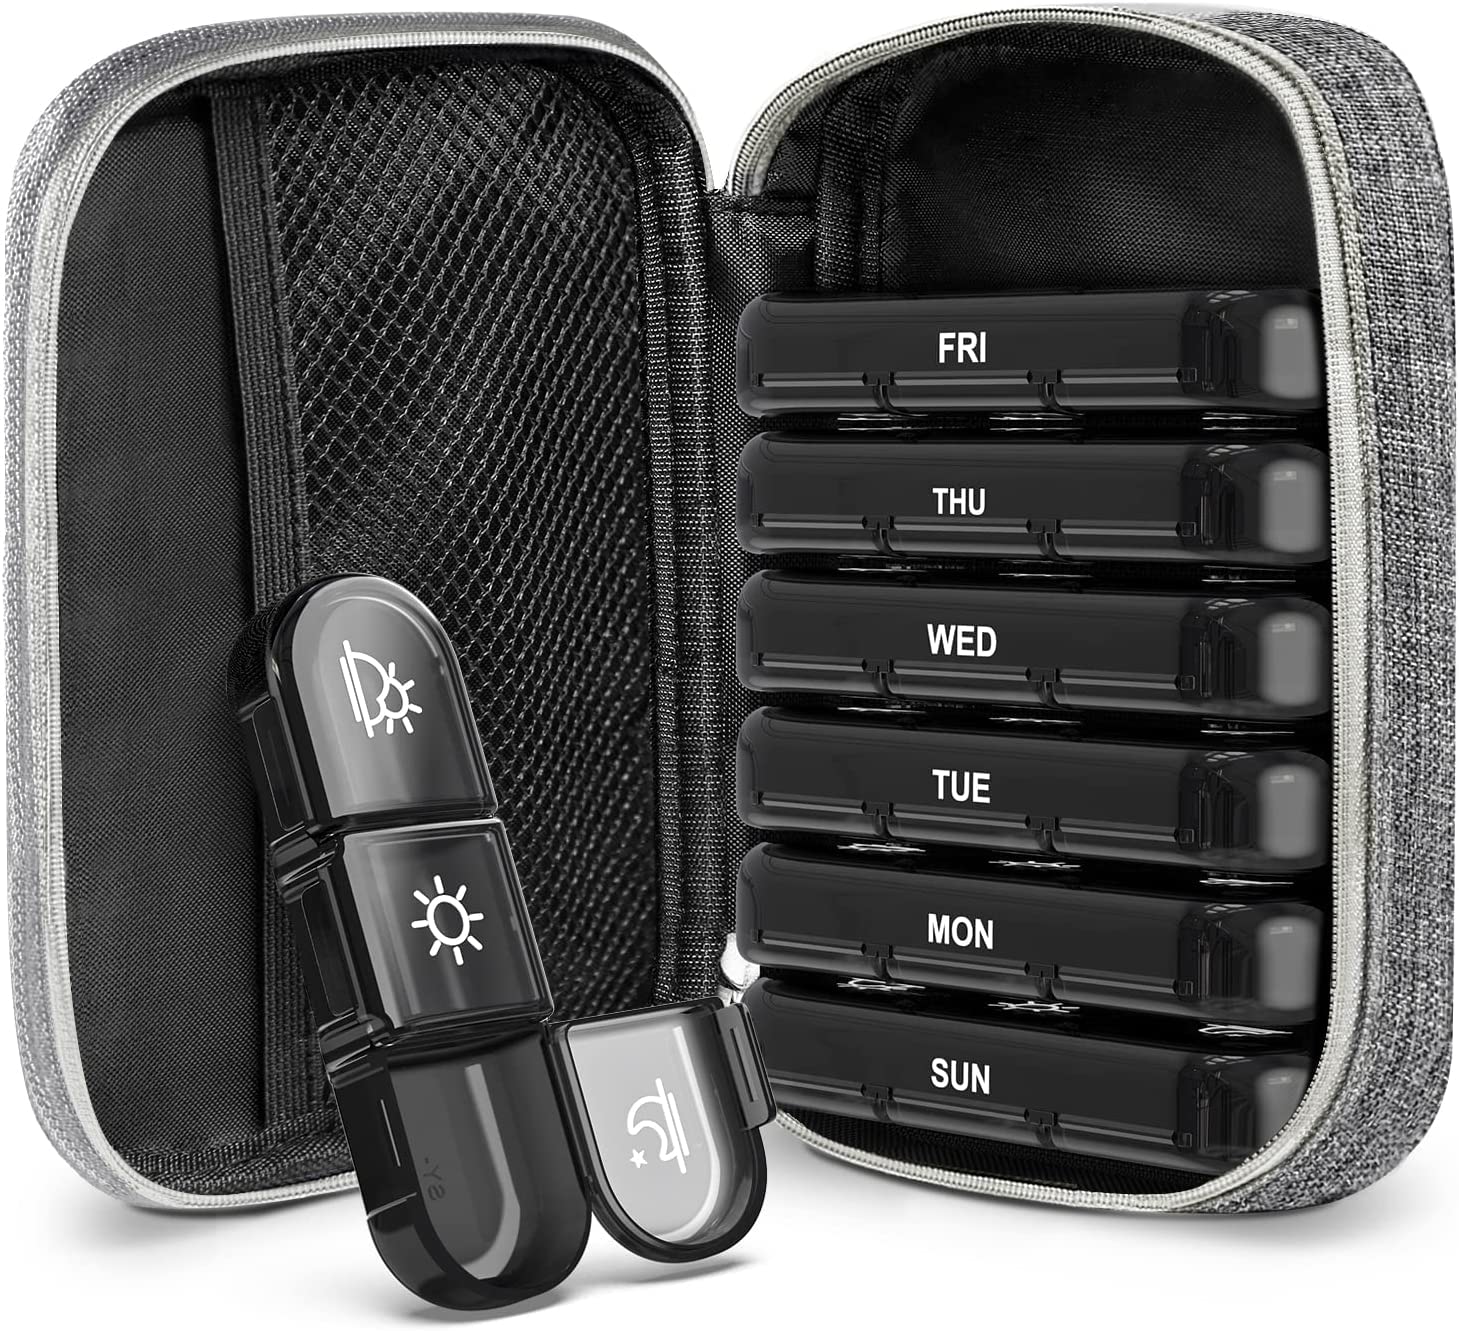 Frizty Pill Organizer - 3 Times a Day, Portable Travel Pill Box with Large Compartments for Vitamin, Medicine, and Supplements